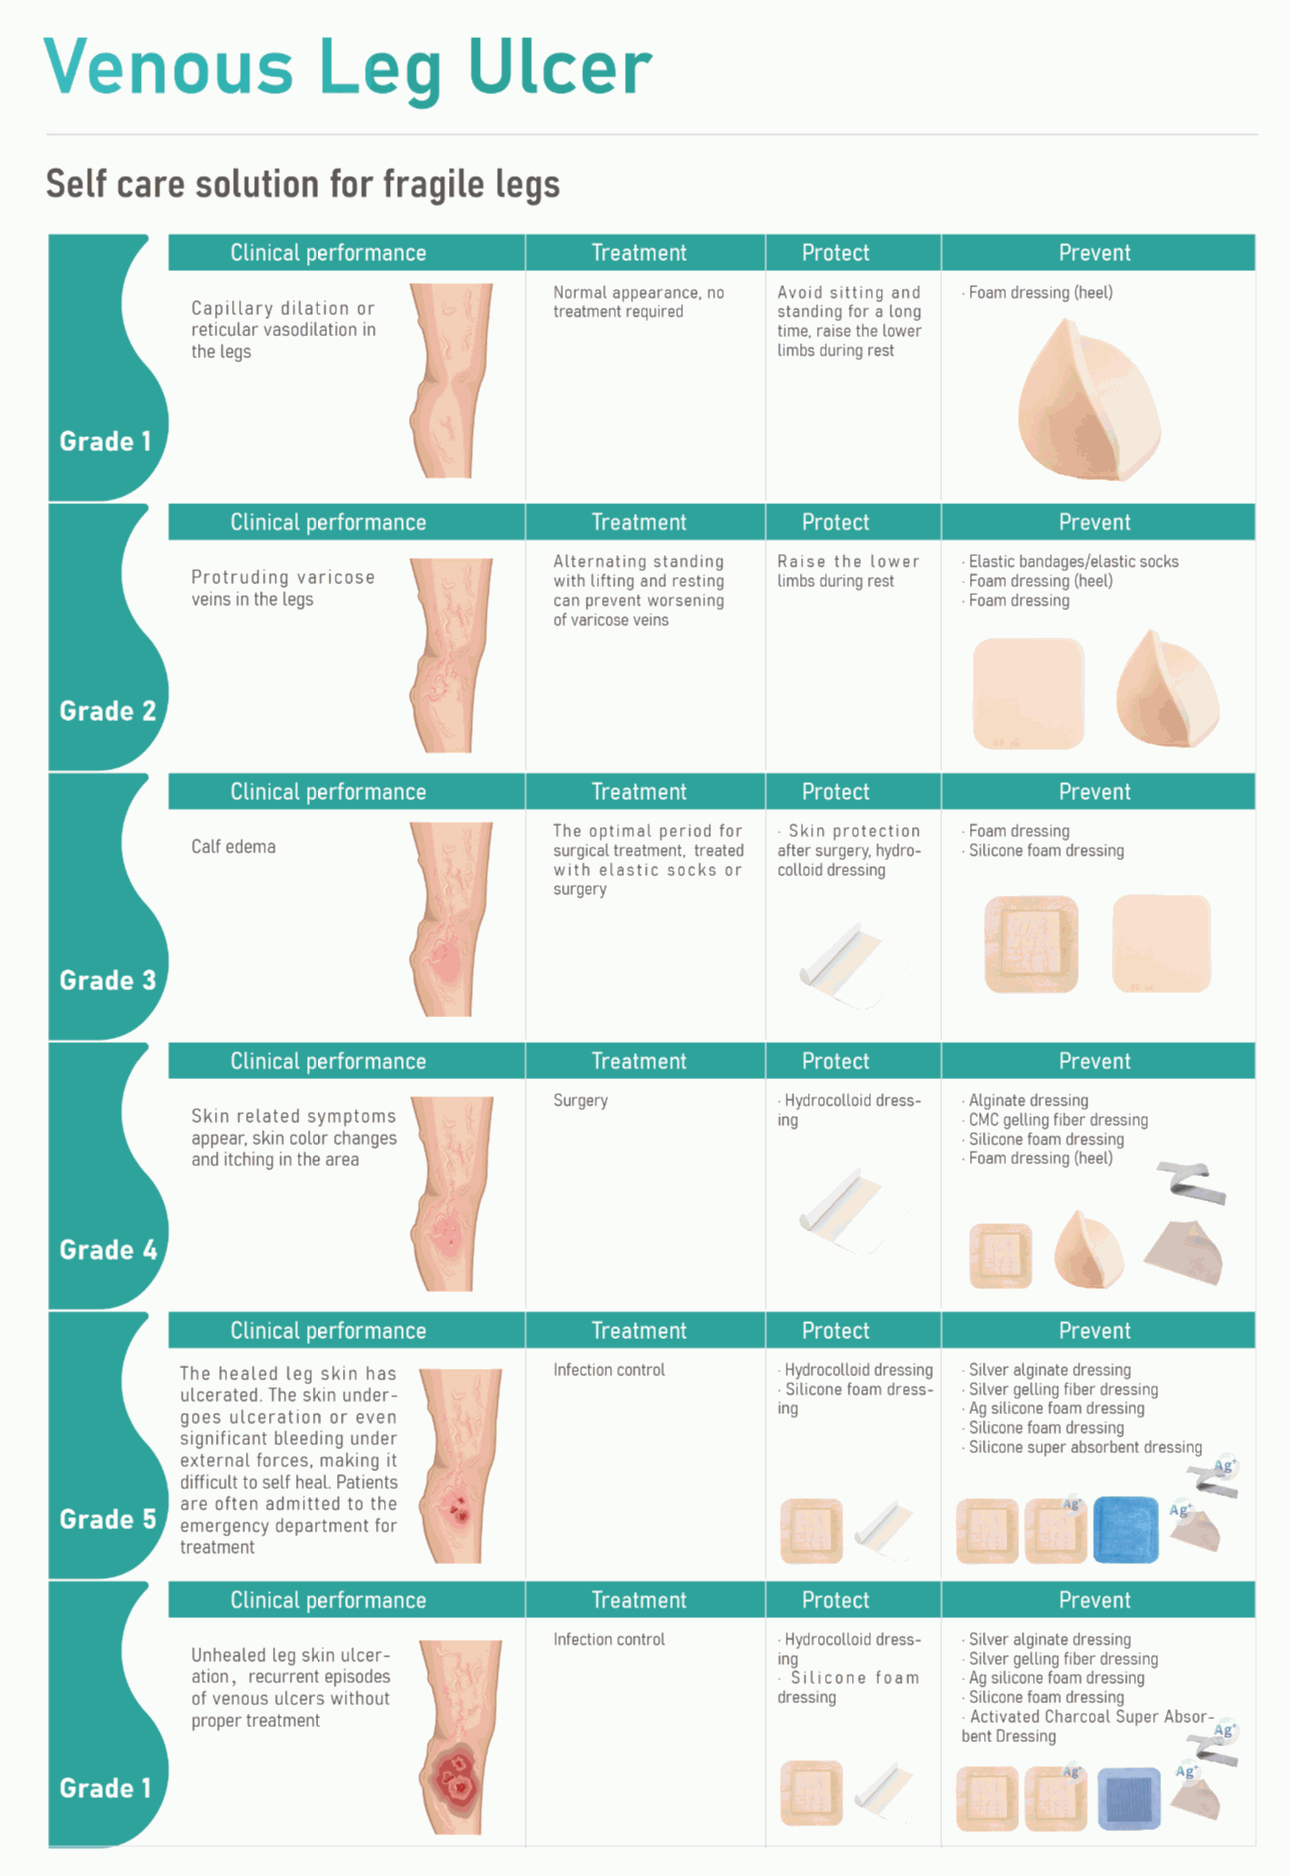 A Deep Dive into Treating Venous Leg Ulcer with Wound Care Dressings